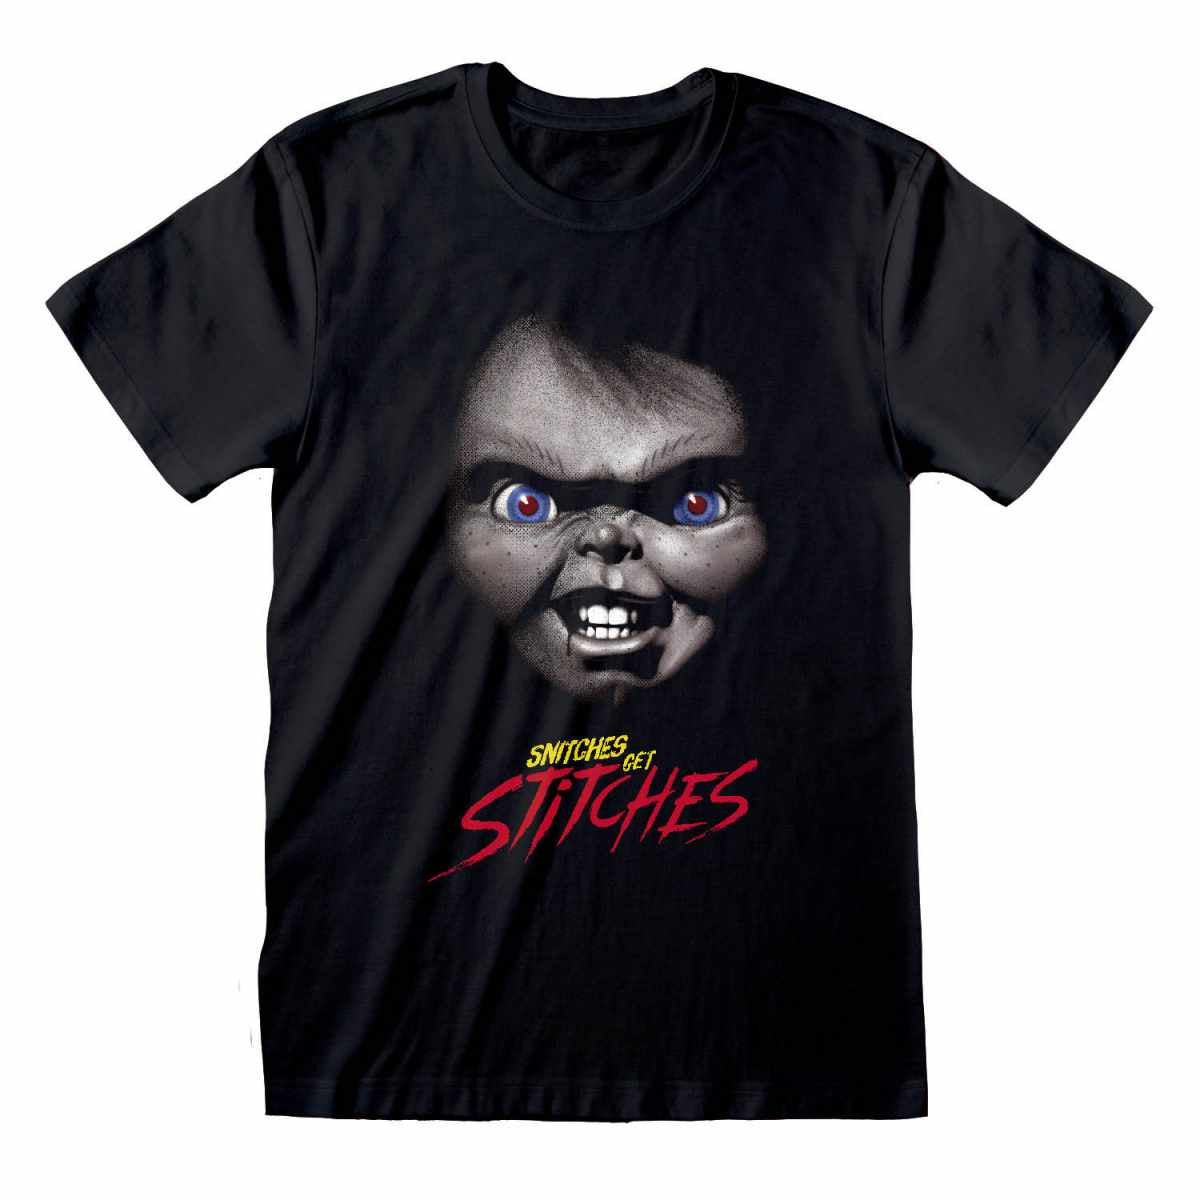 CHILD'S PLAY - Snitches Get Stitches T-Shirt